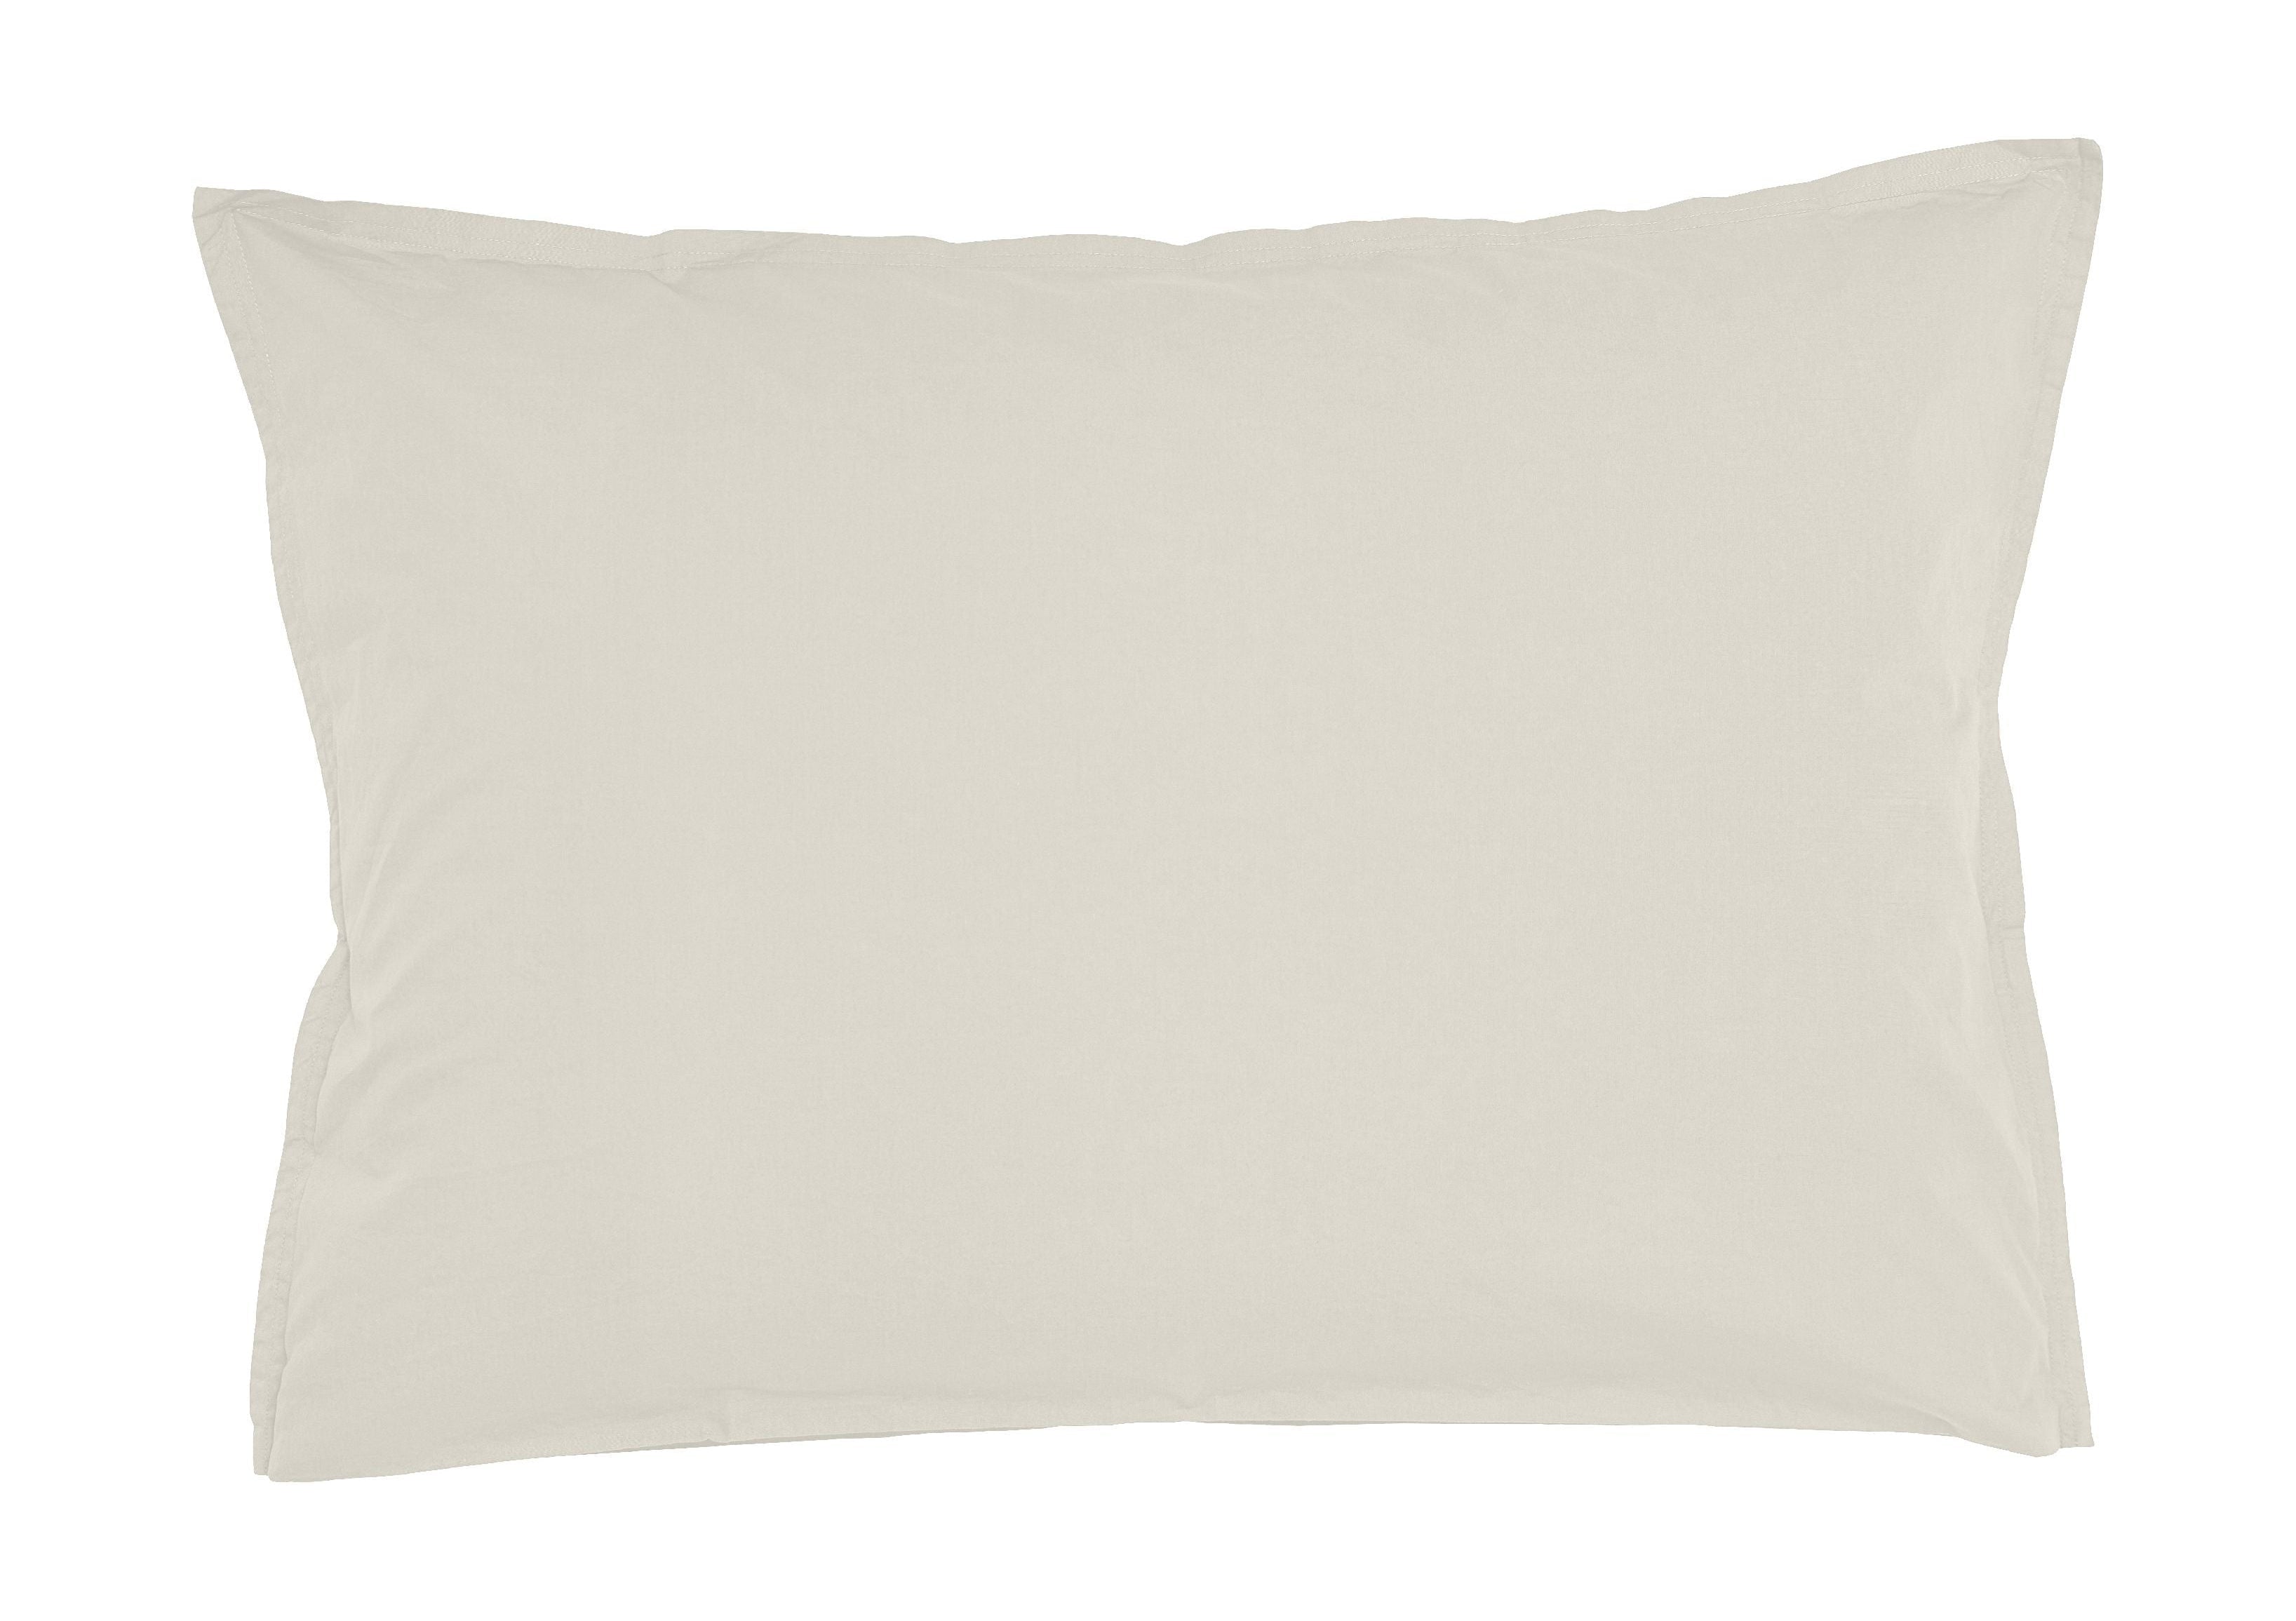 Door Nord Ingrid Cushion Cover 70x50 cm, Shell